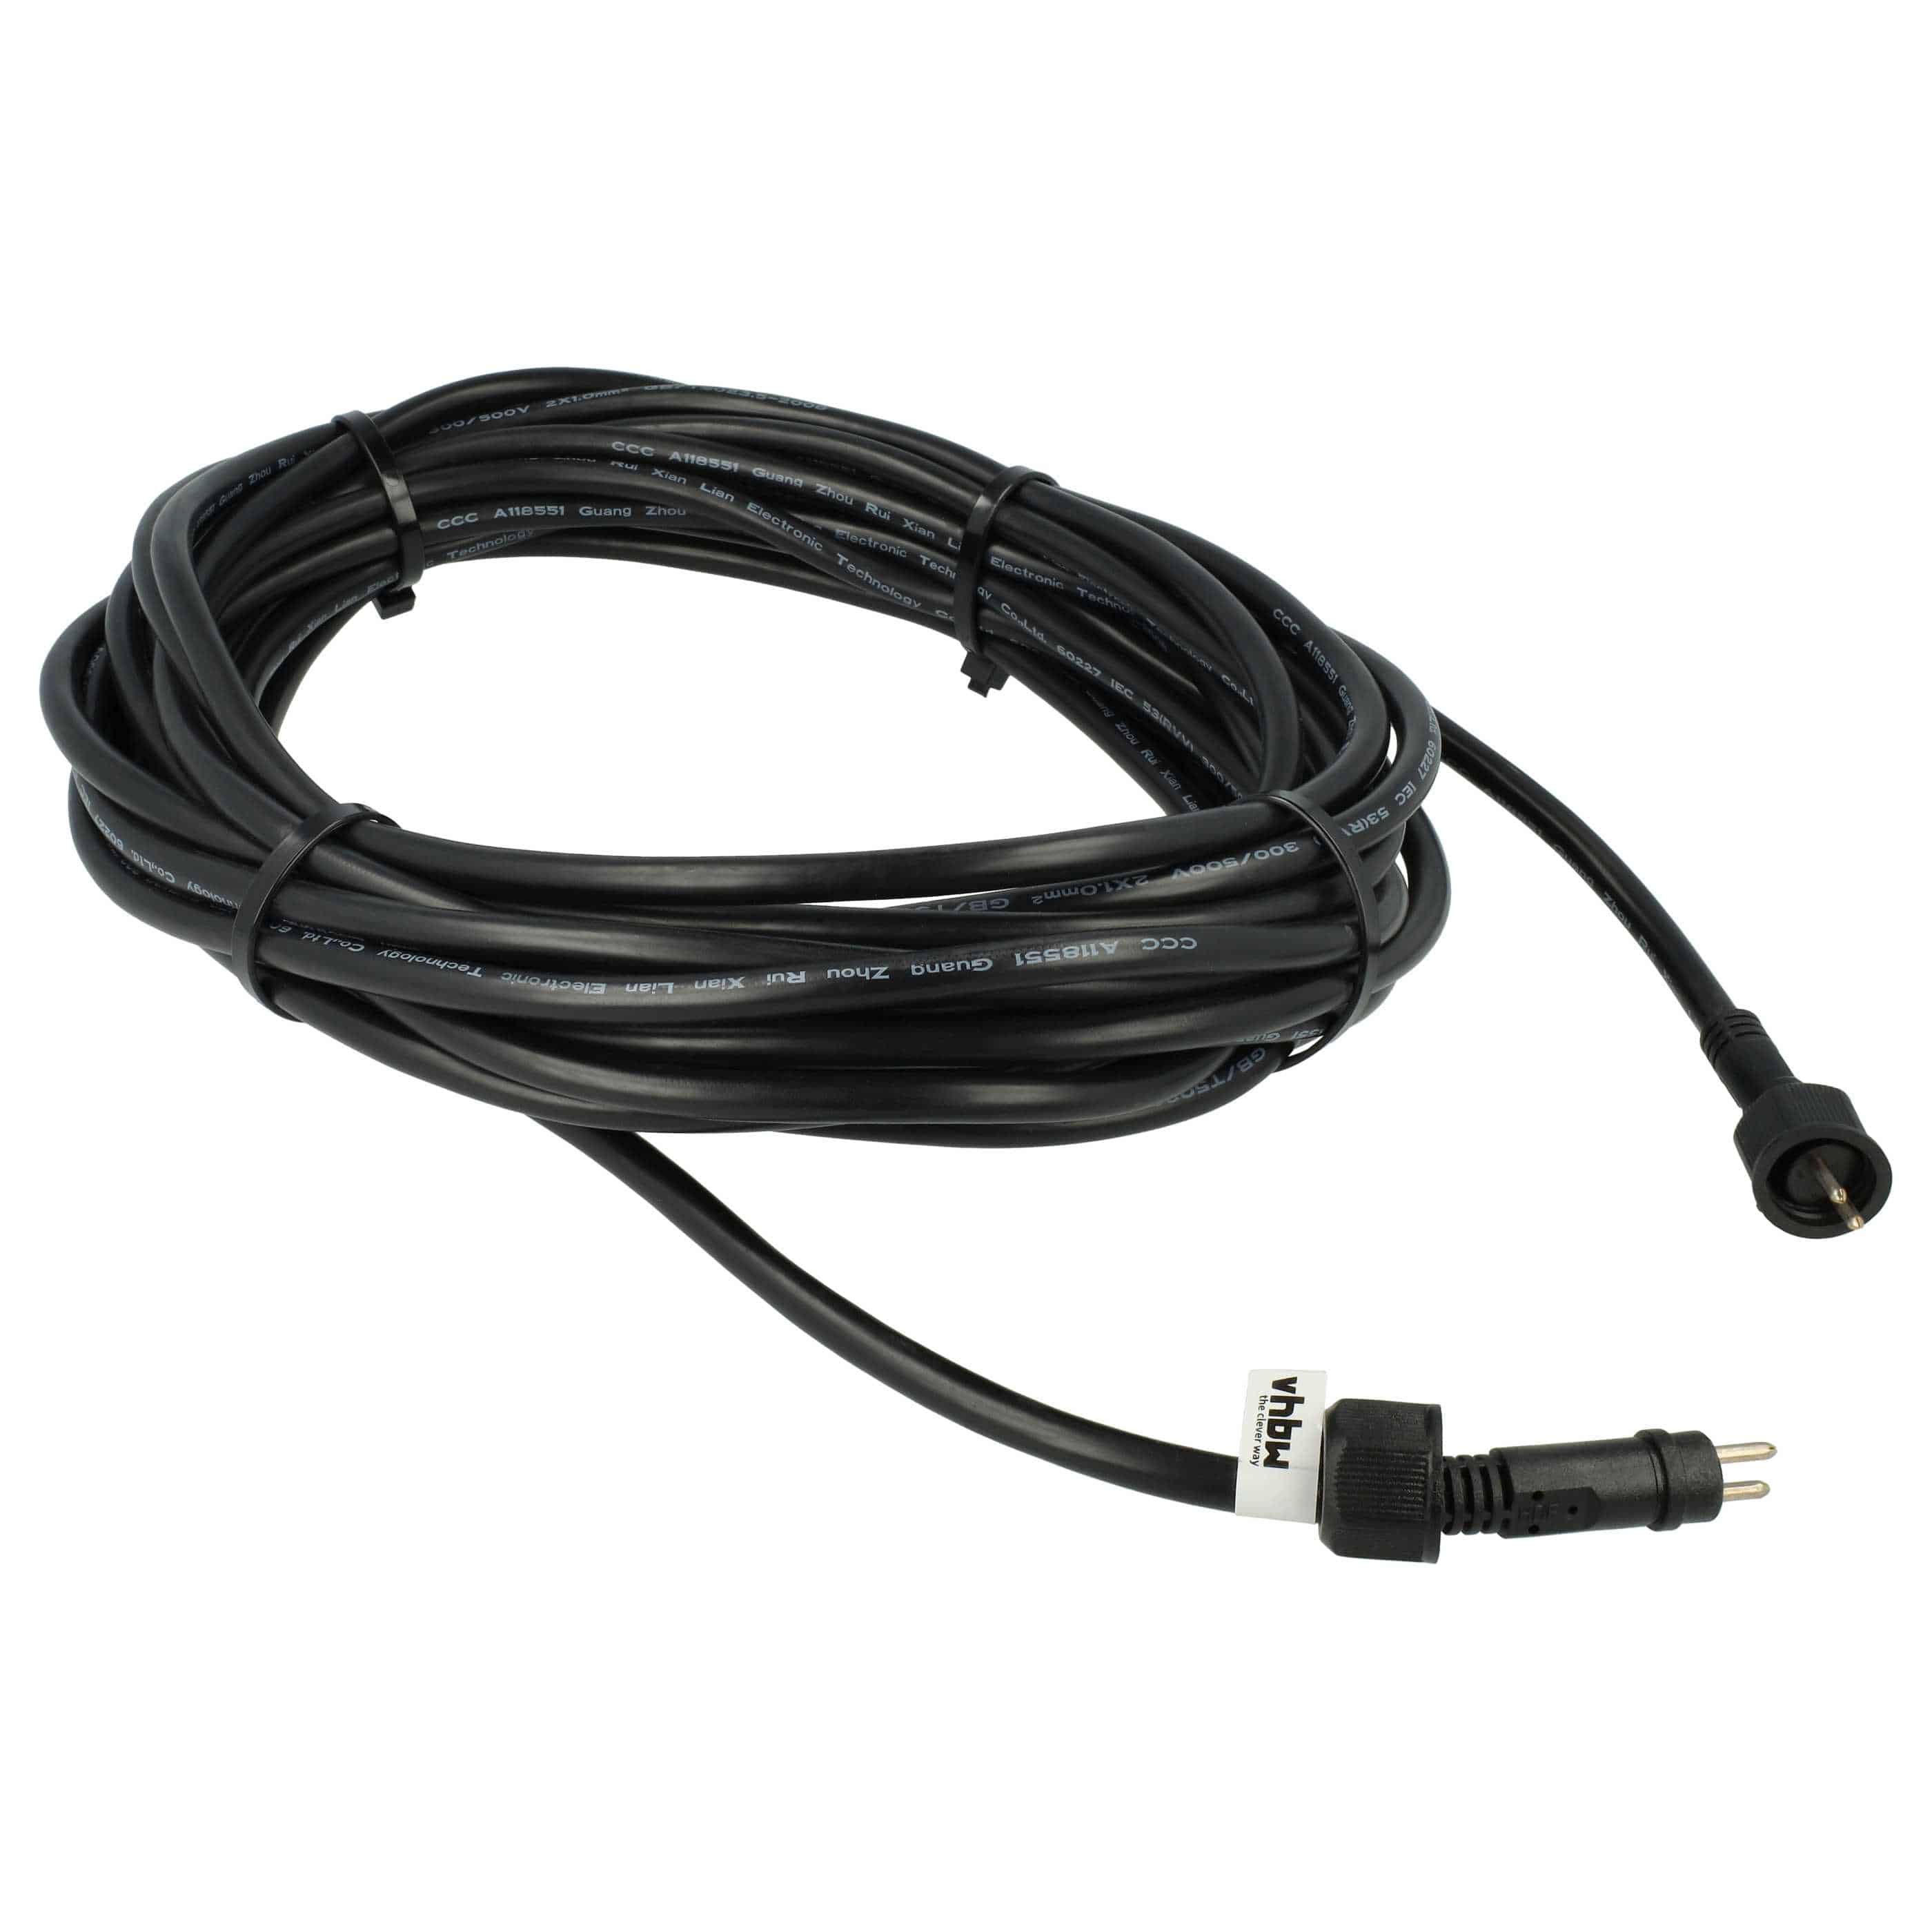 IP44 Cable suitable for Fountain Pump, Garden Irrigation & Lighting - 10 m Low Voltage Cable 100 Watt